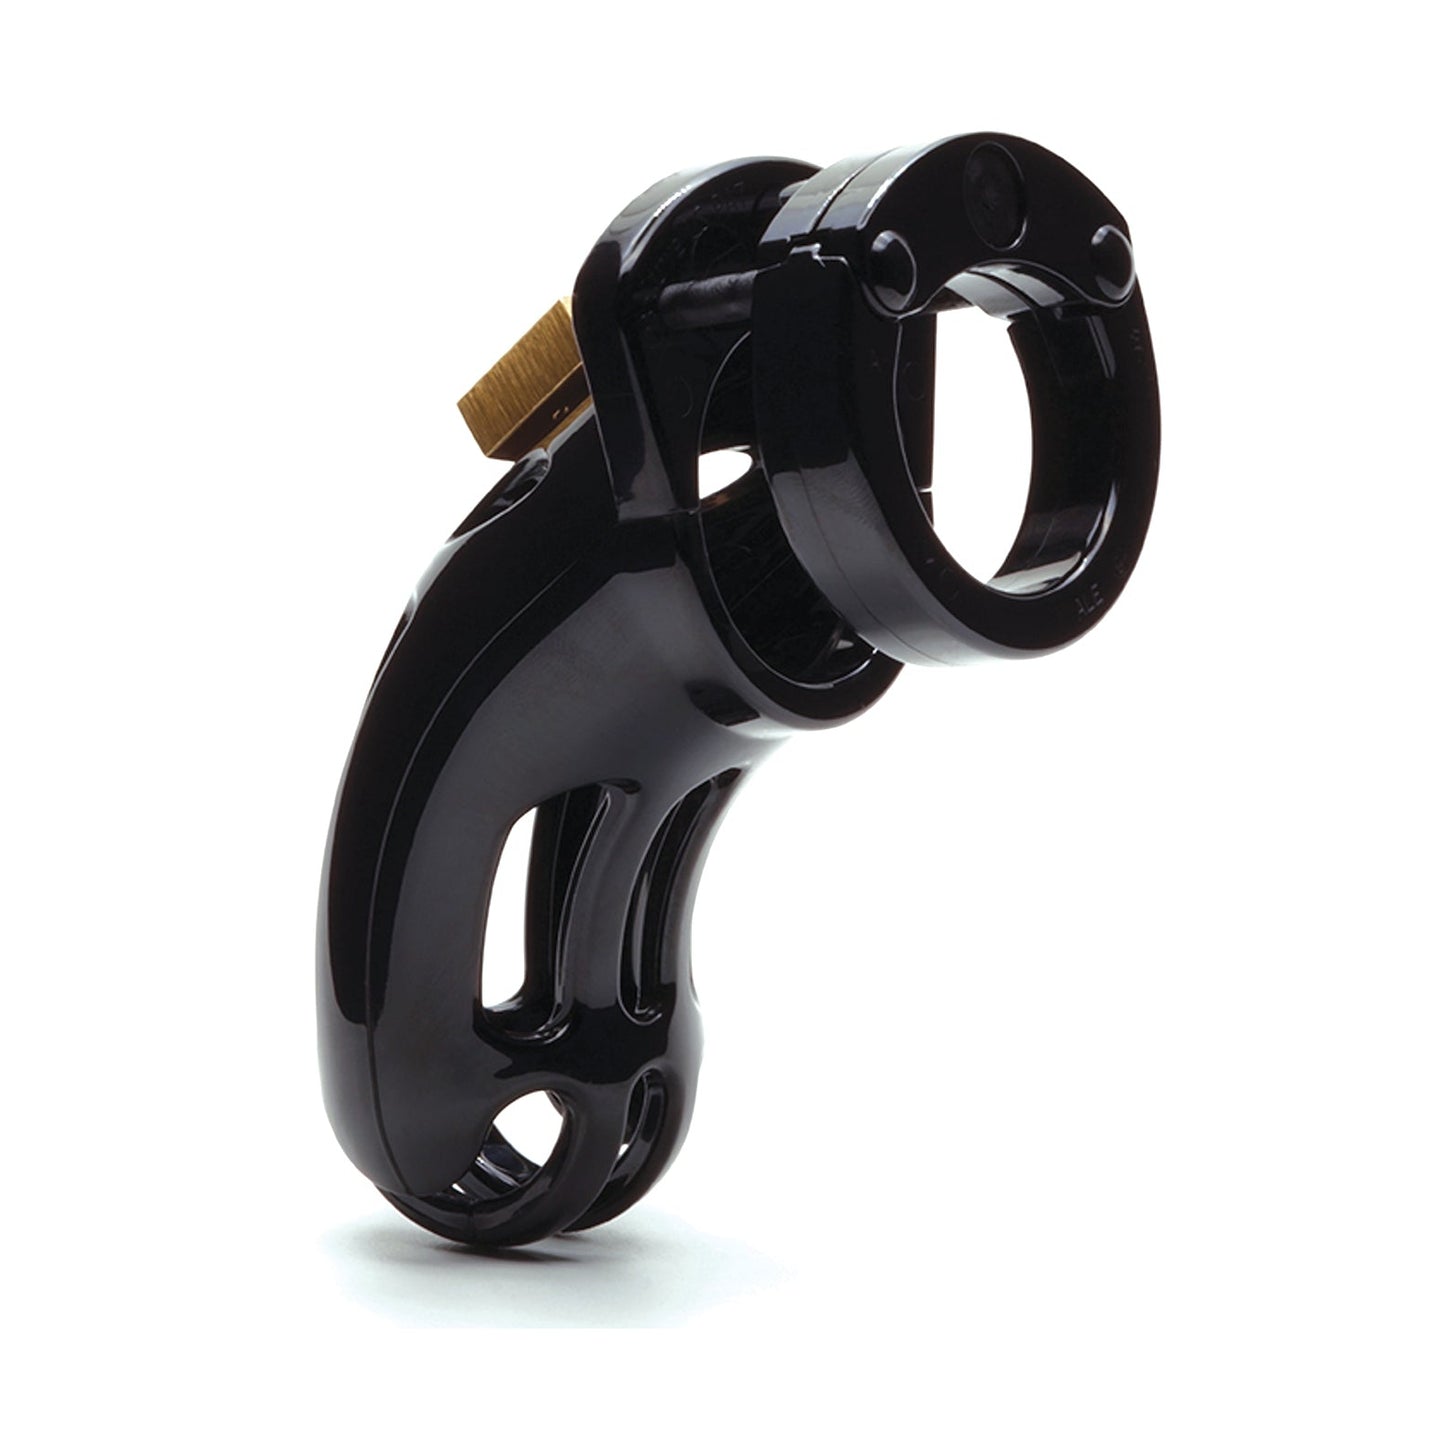 The Curve 3 3/4" Curved Cock Cage & Lock Set